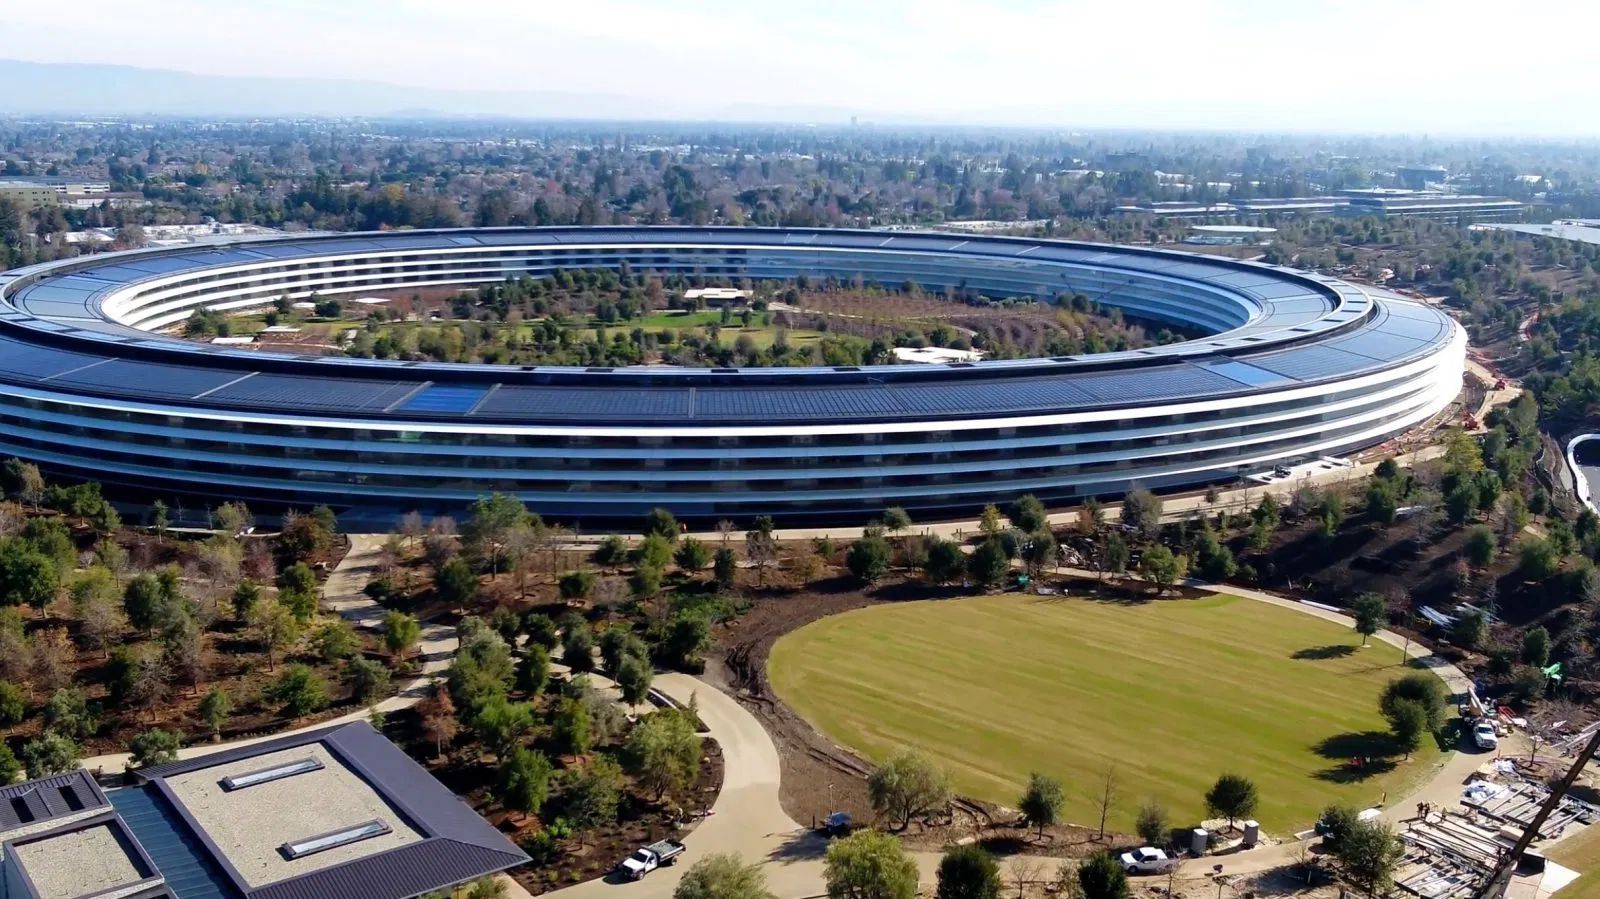 Bloomberg: ‘Very Limited’ Number of Apple Workers Returning to Office Beginning June 15